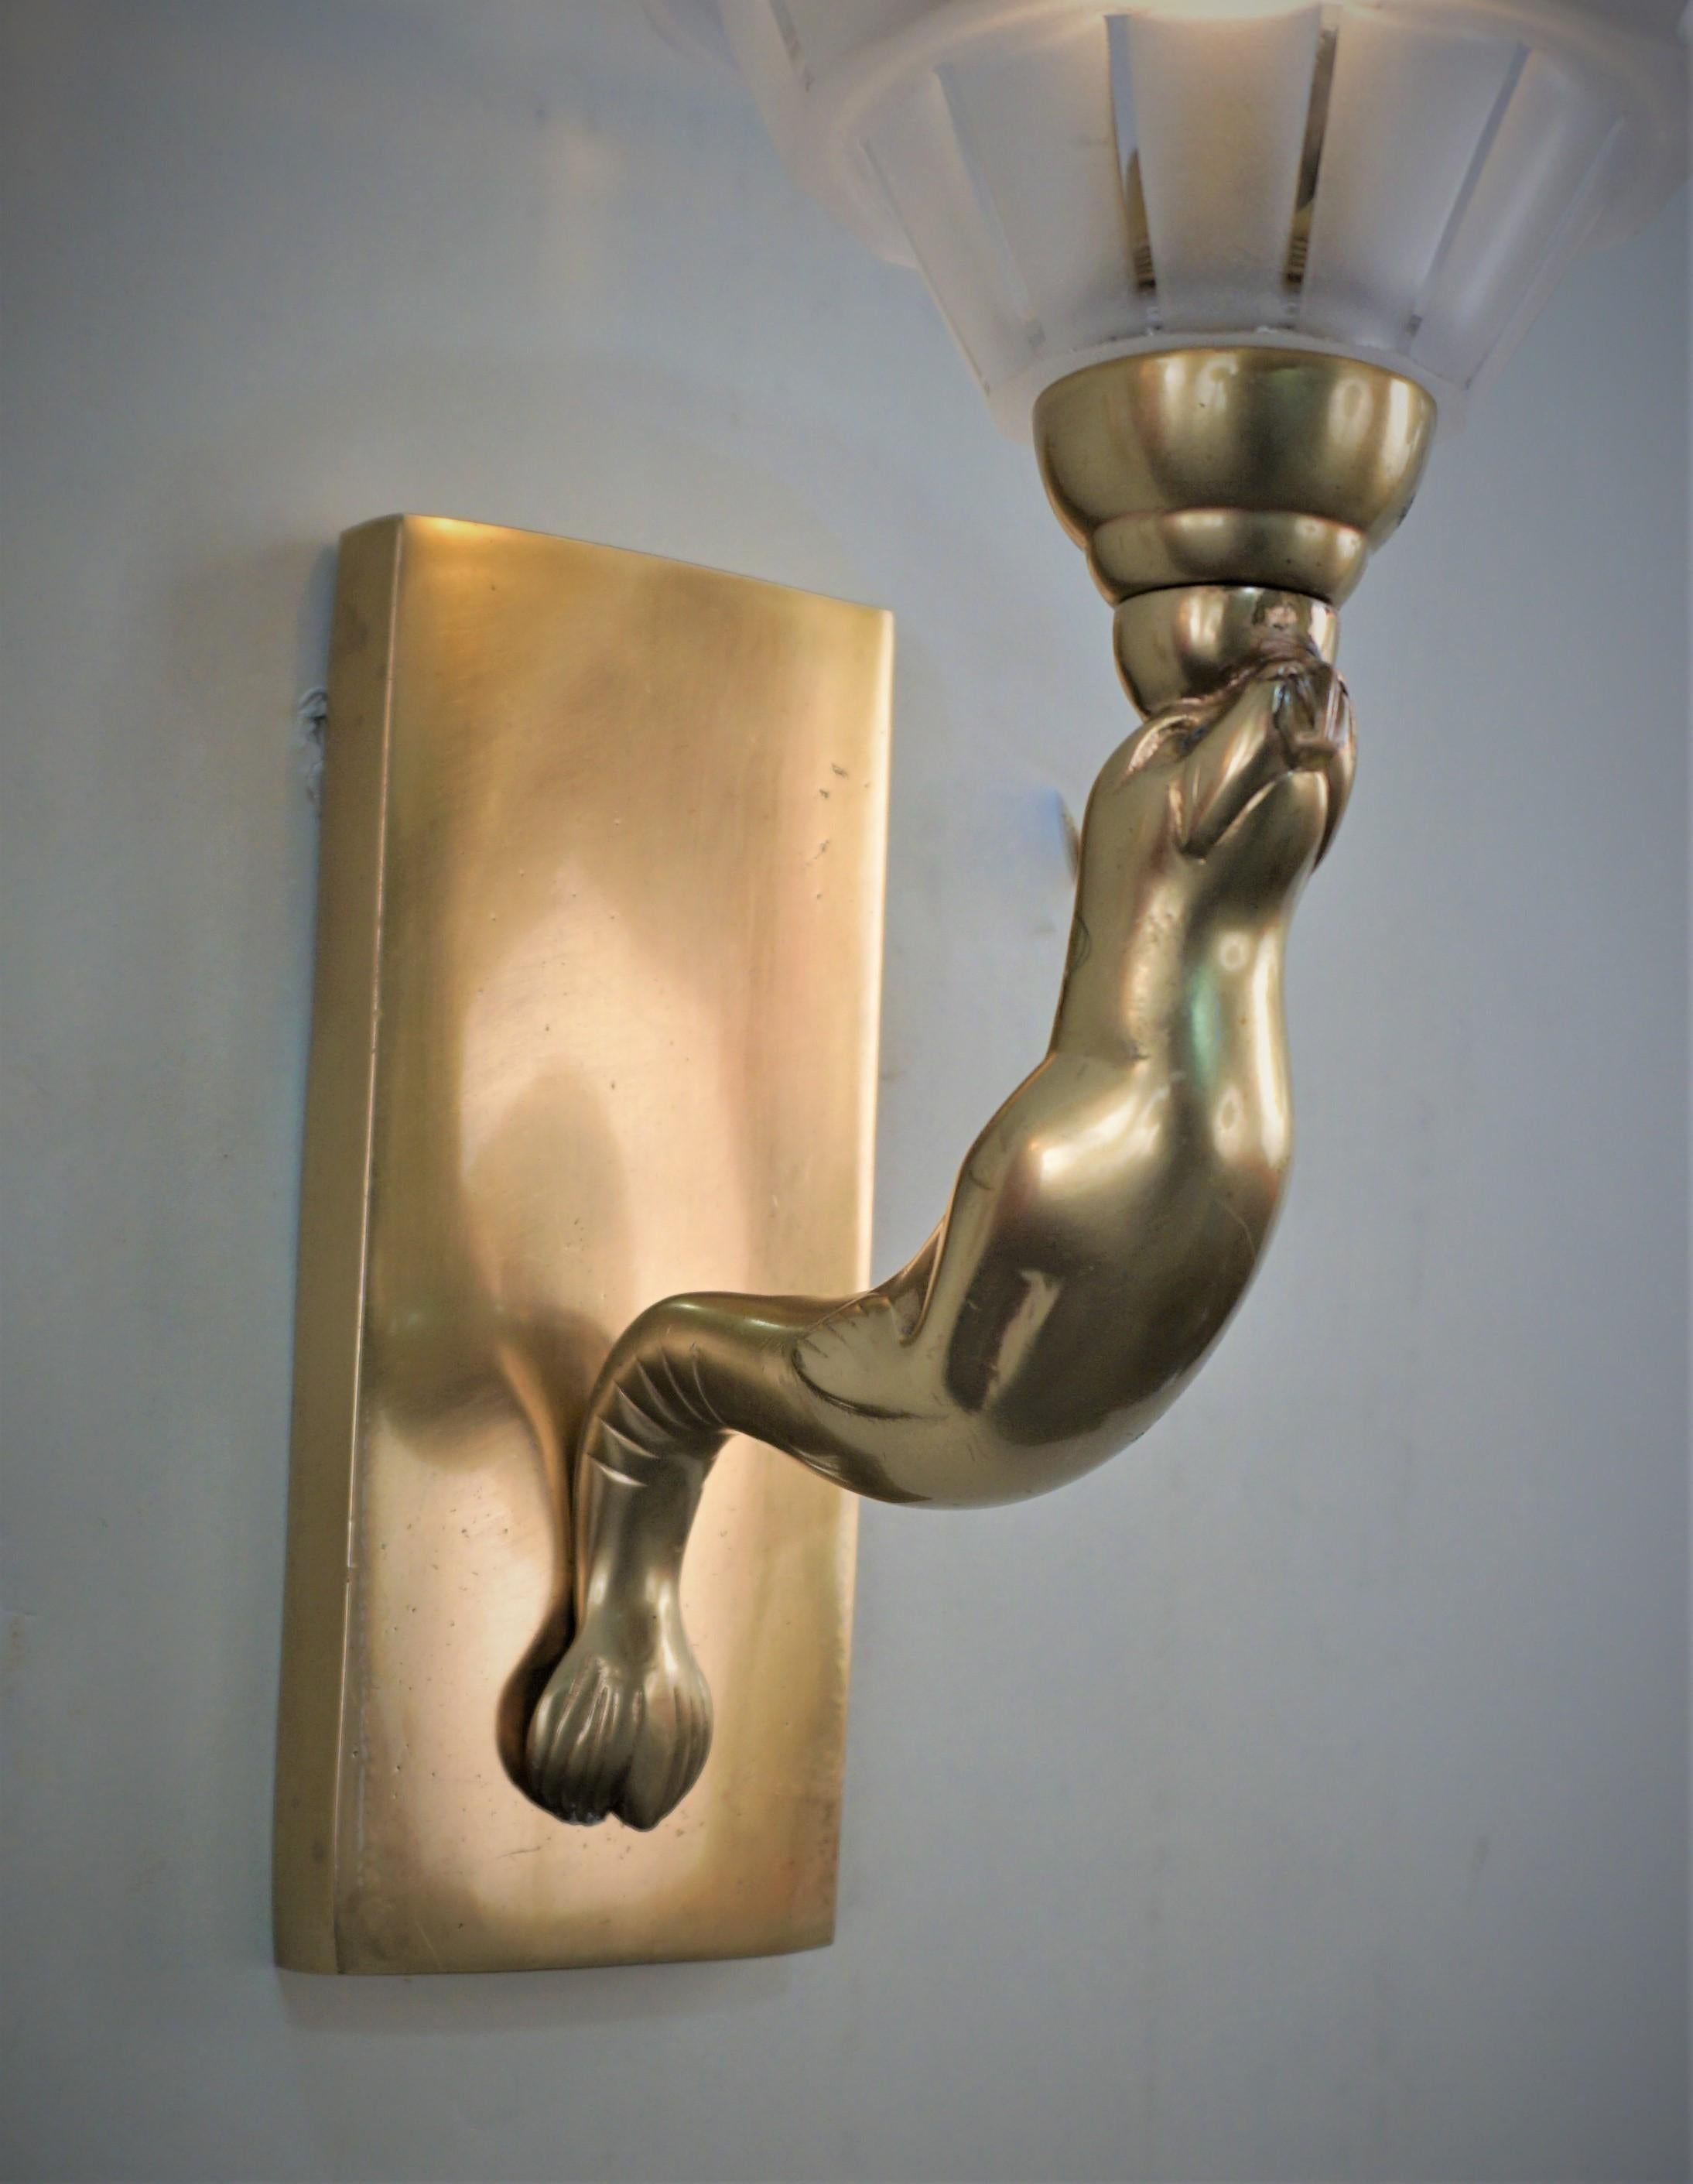 French Art Deco Seal Wall Sconces - 2 pairs In Good Condition For Sale In Fairfax, VA